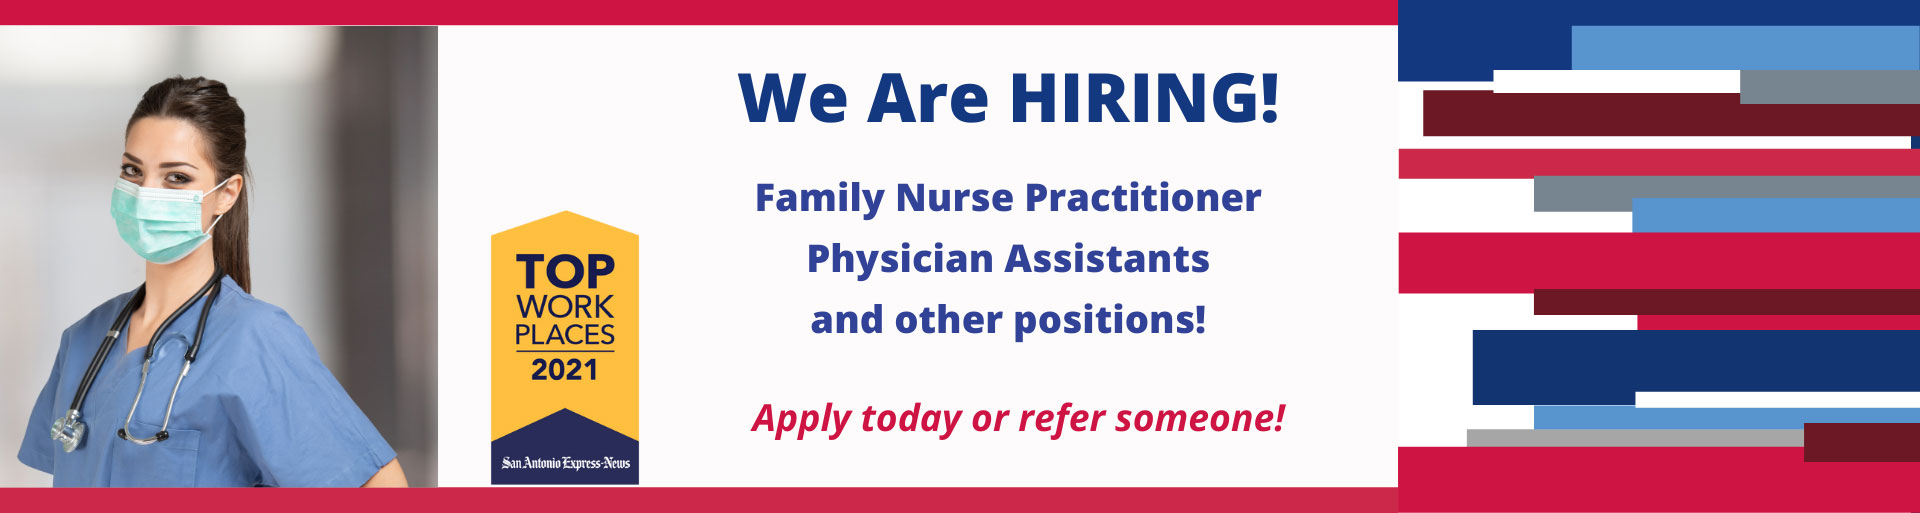 We-are-Hiring_FNP,PA